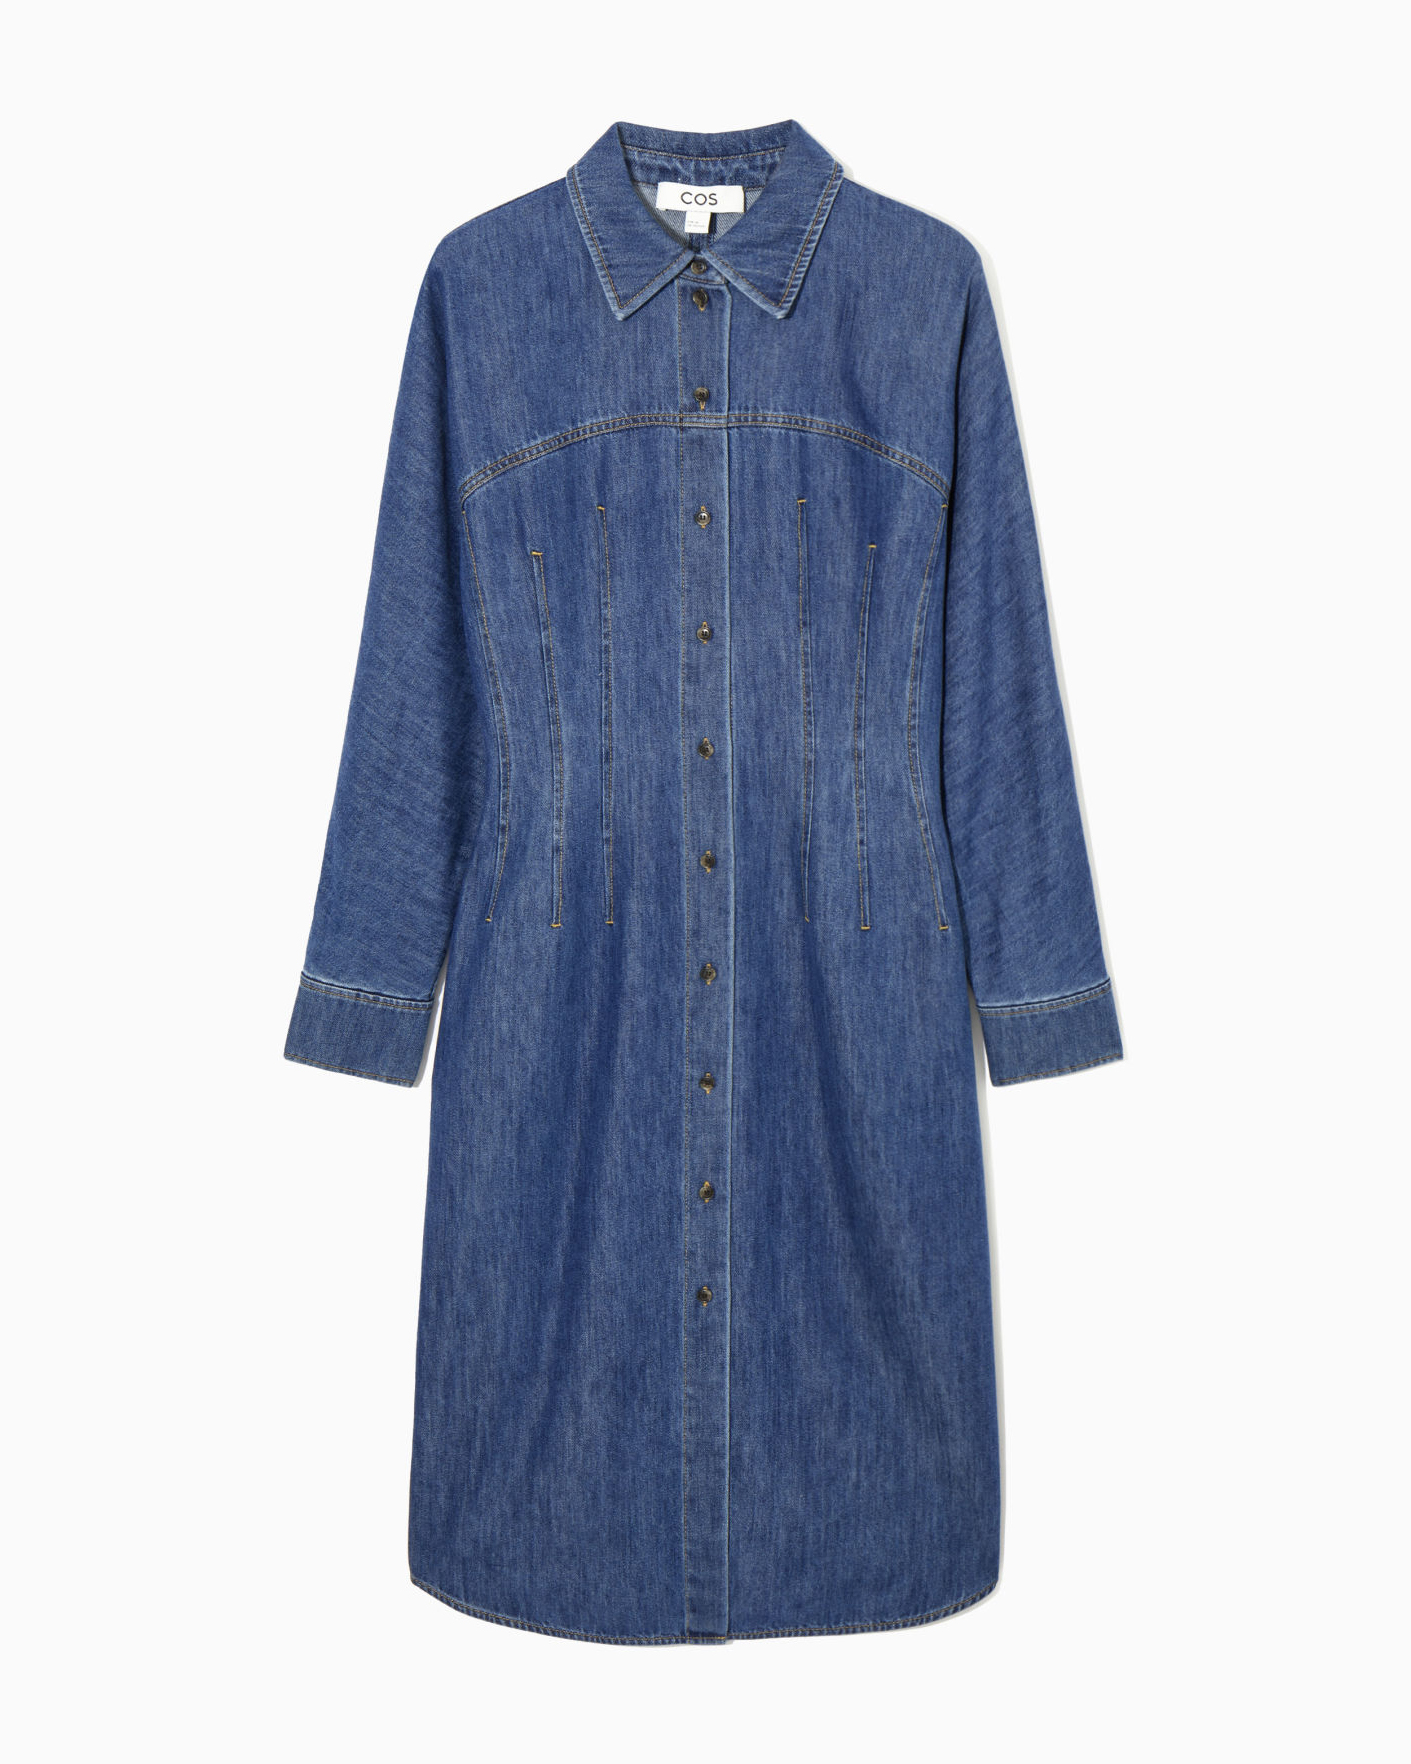 Shirt Dresses Are the Unsung Heroes of Your Closet - FASHION Magazine